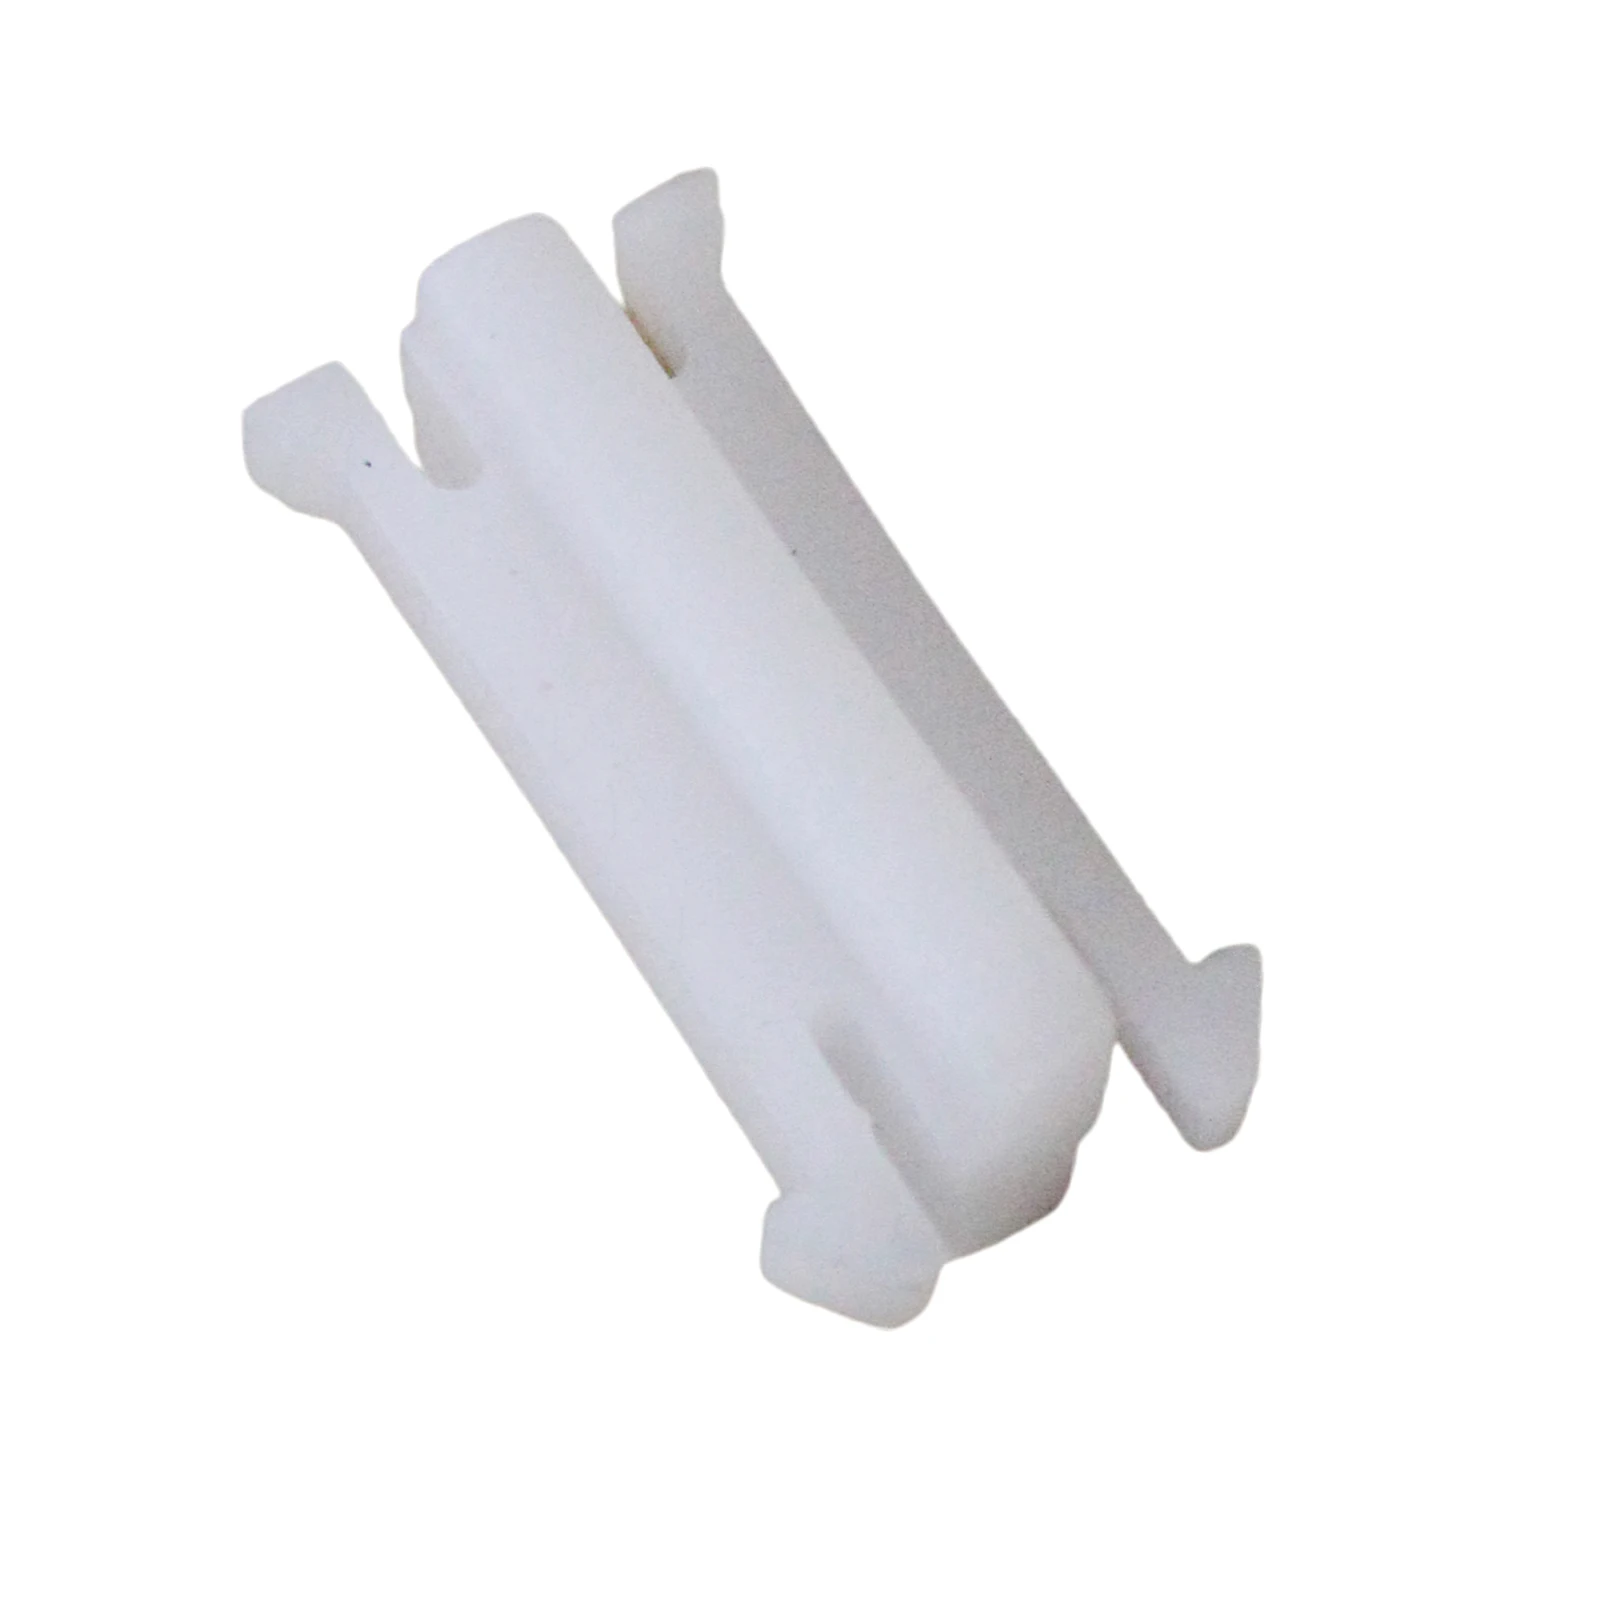 Bonnet Lock Catch Cable Clip 4549268 Fits for Ford Focus & C-Max 2004 -2011 Accessories White